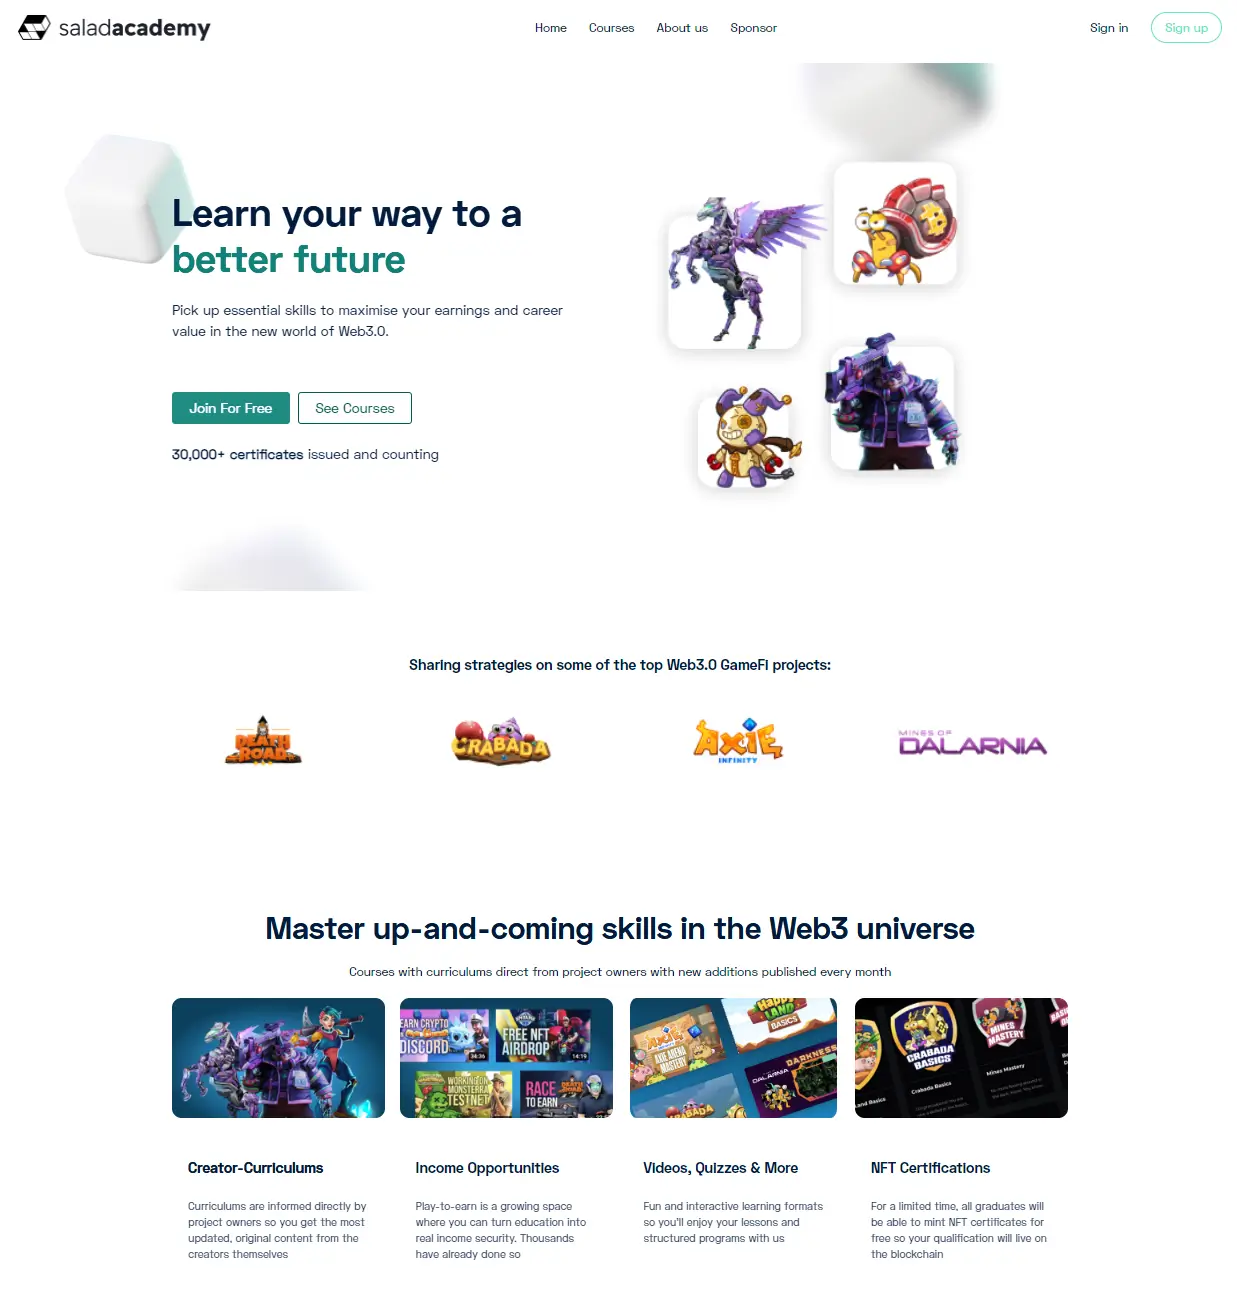 a screenshot of Salad Academy's landing page showing gaming figures